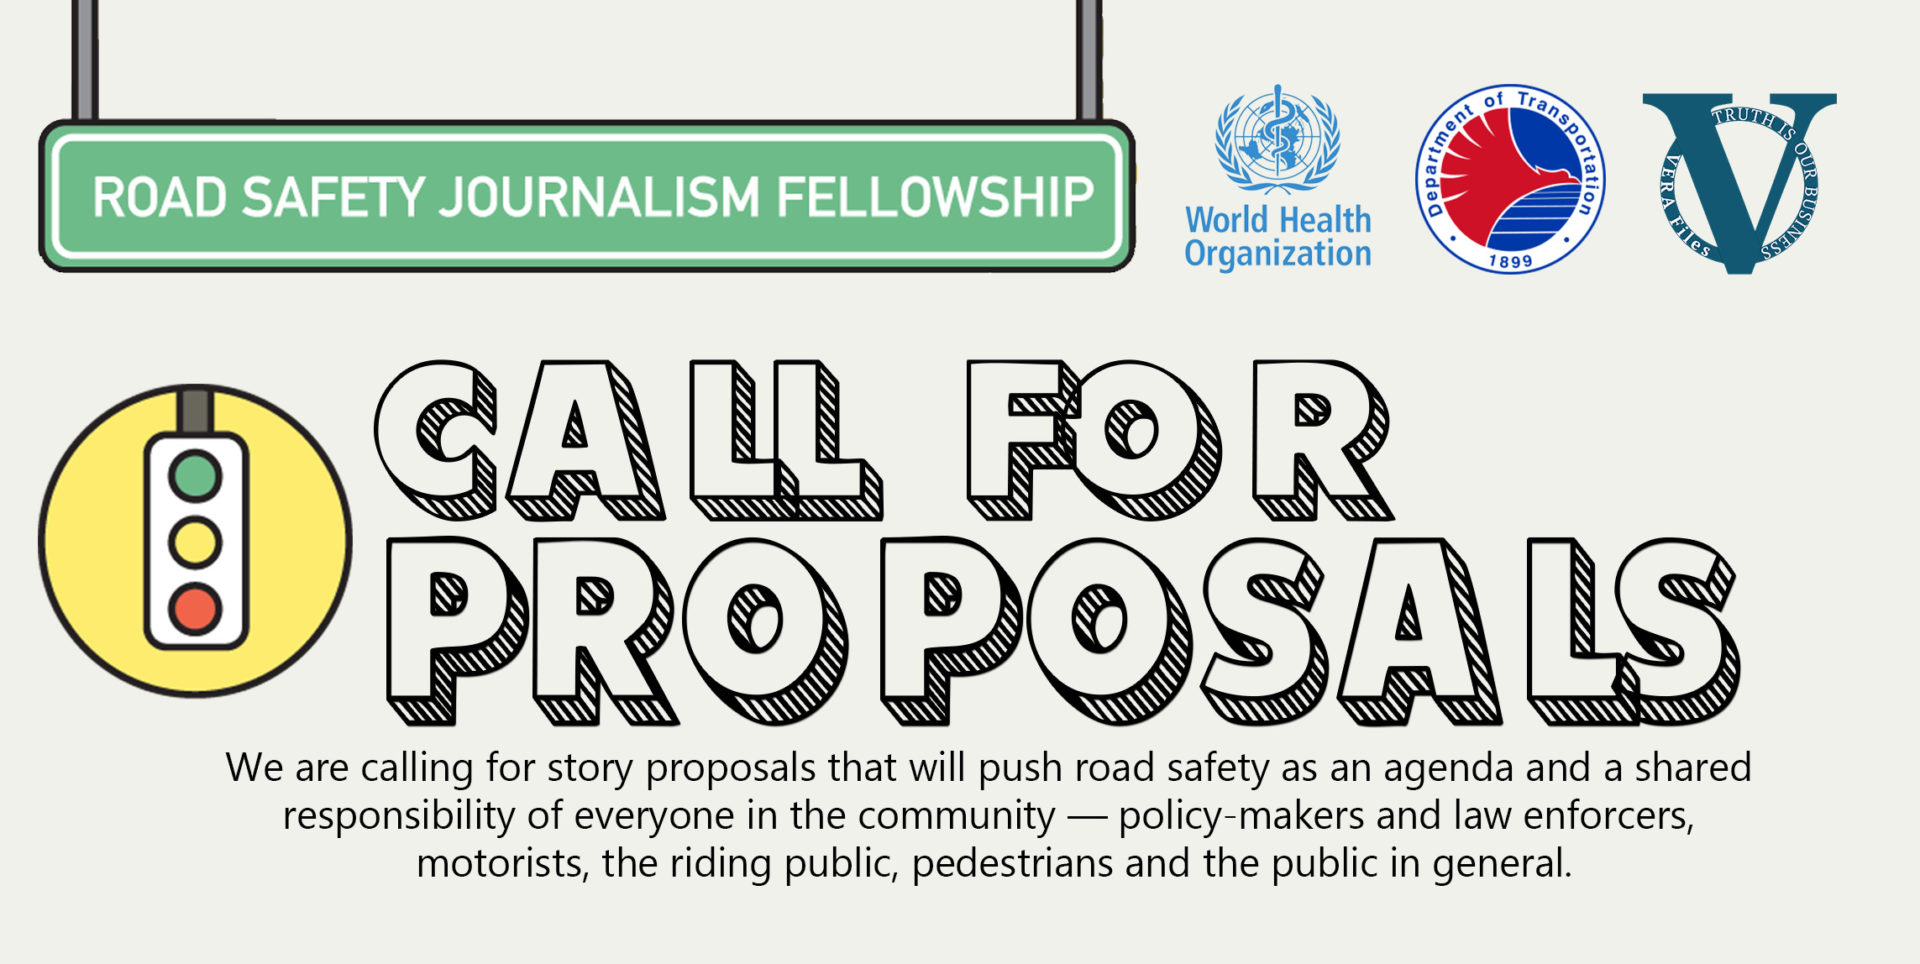 Road Safety Journalism Fellowship - Call for Proposals 2019